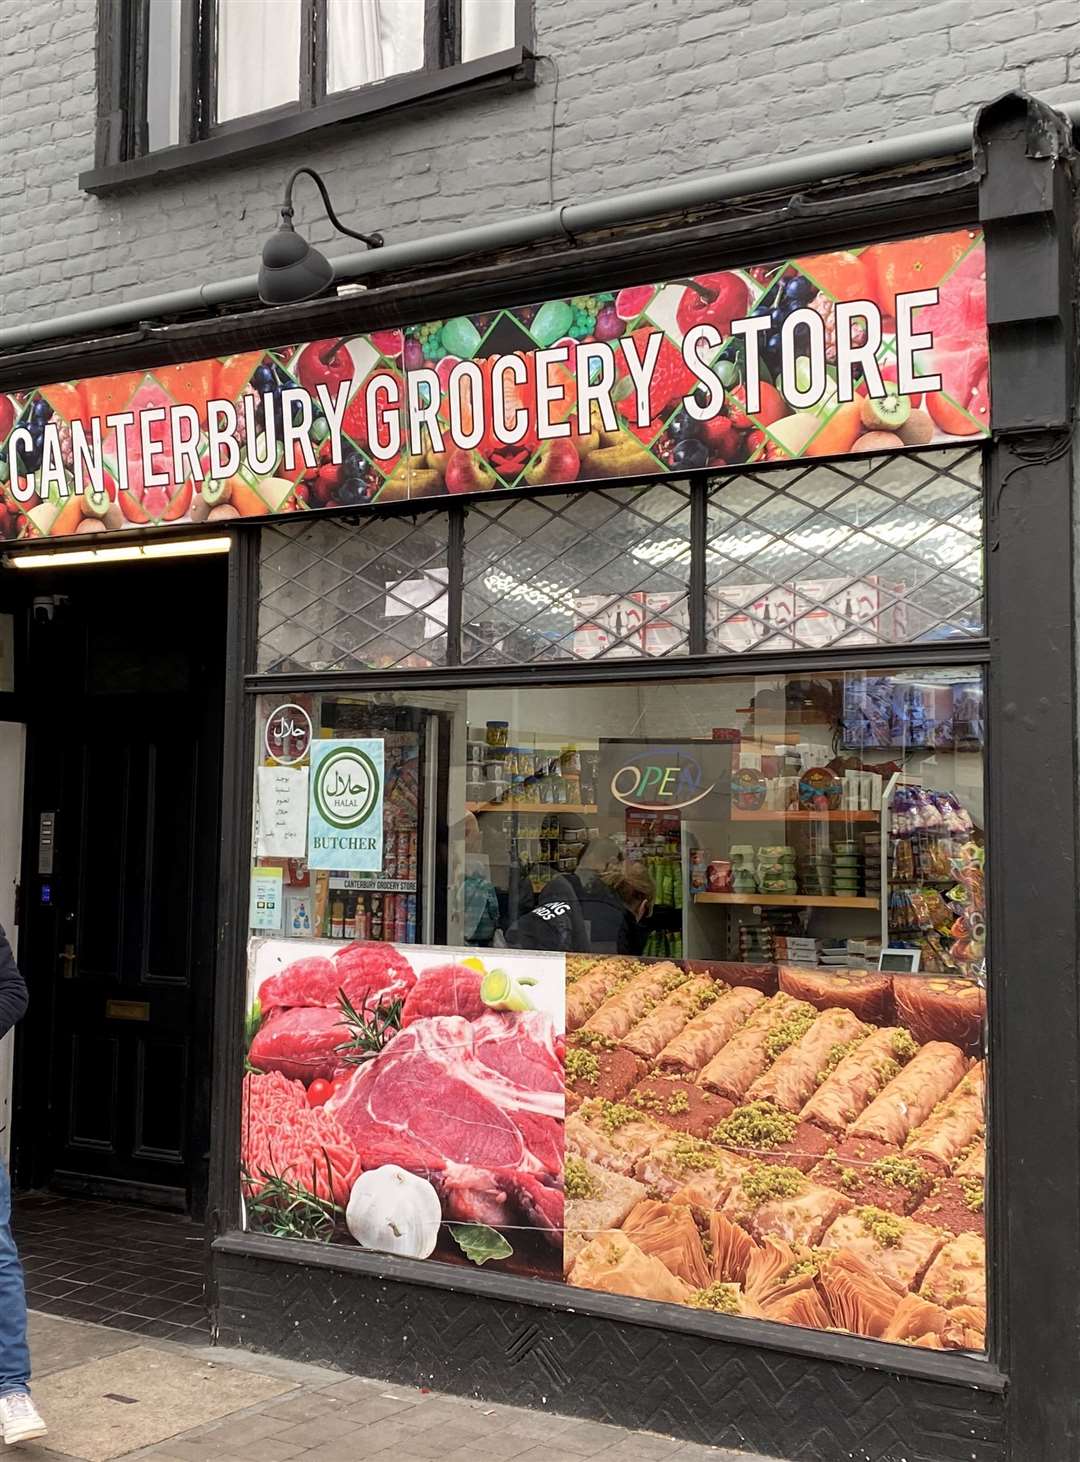 The Canterbury Grocery Halal Store on Lower Bridge Street in Canterbury